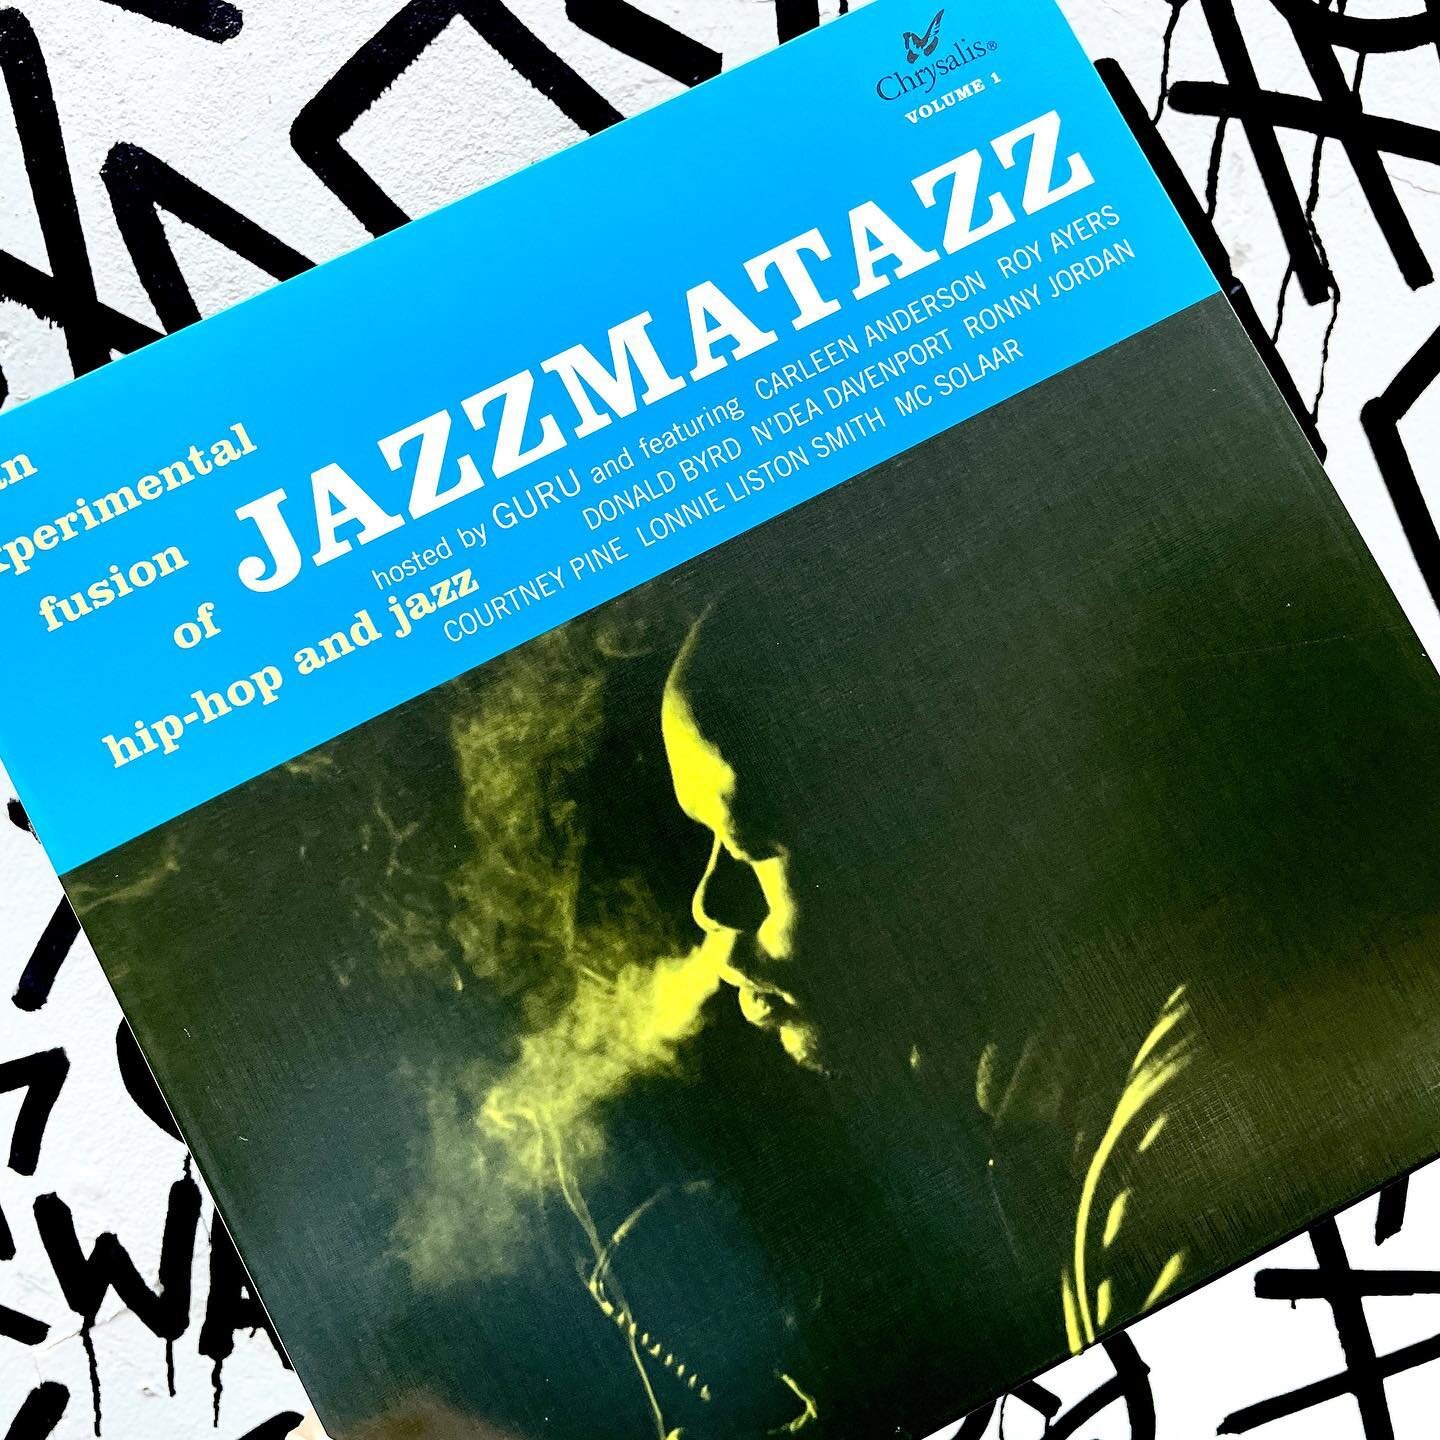 GURU - JAZZMATAZZ

30 YEARS TODAY

IF YOU ARE STARTING YOUR COLLECTION, THIS RECORD SHOULD BE YOUR FIRST ONE &hellip;

check &mdash;&gt; entire record ;-)

Available at the shop &mdash;&gt; link in the bio